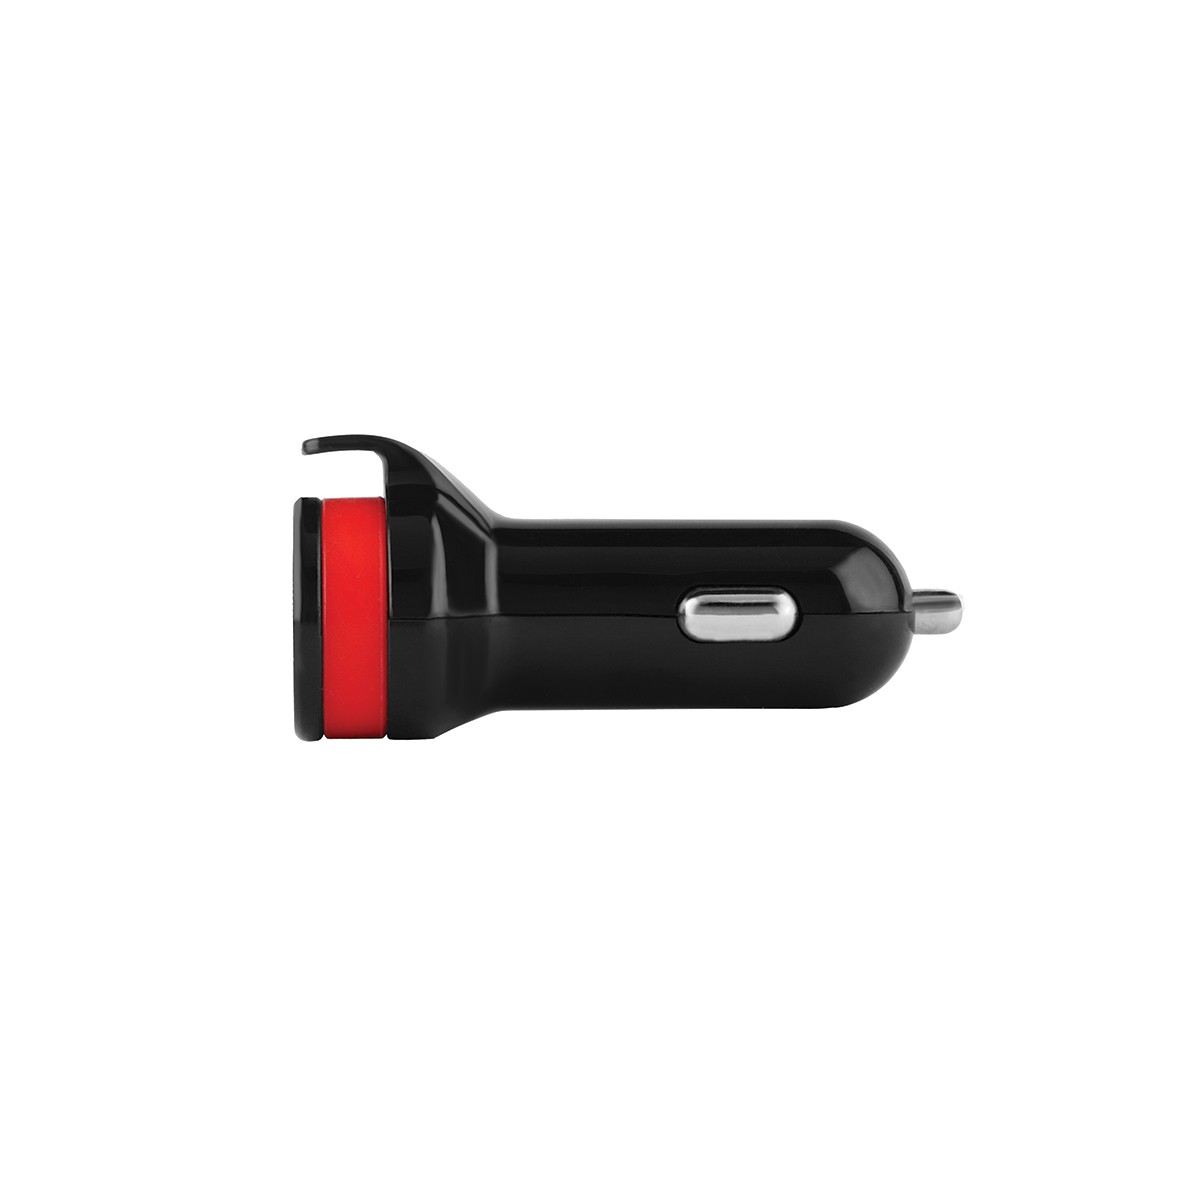 UC300 2.4A USB Car Charger